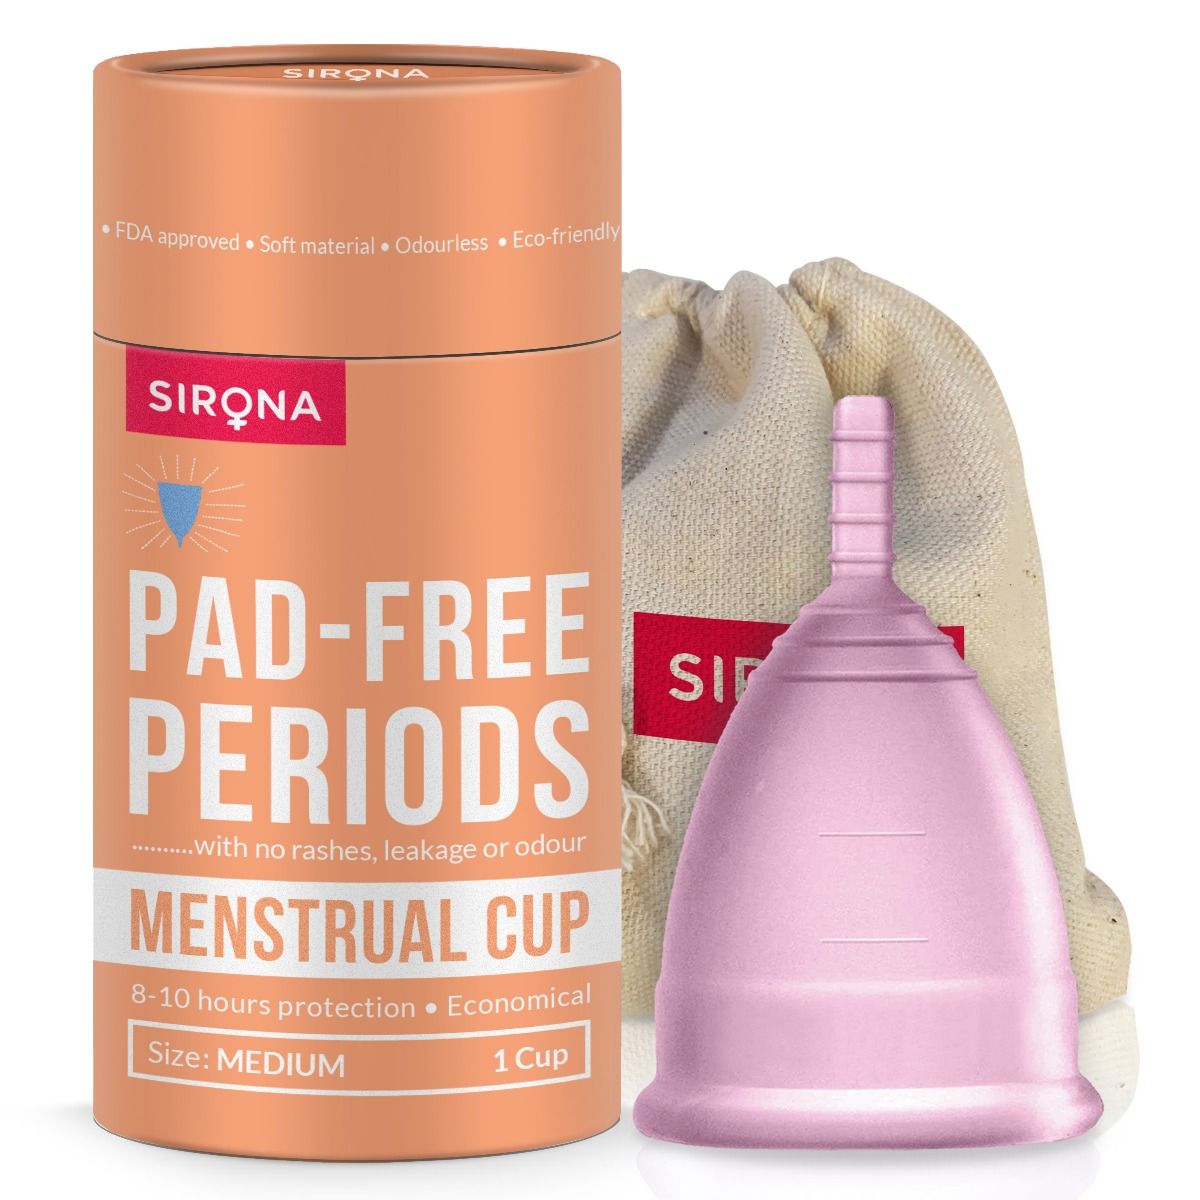 Sirona Pad-Free Periods Menstrual Cup Medium, 1 Count, Pack of 1 